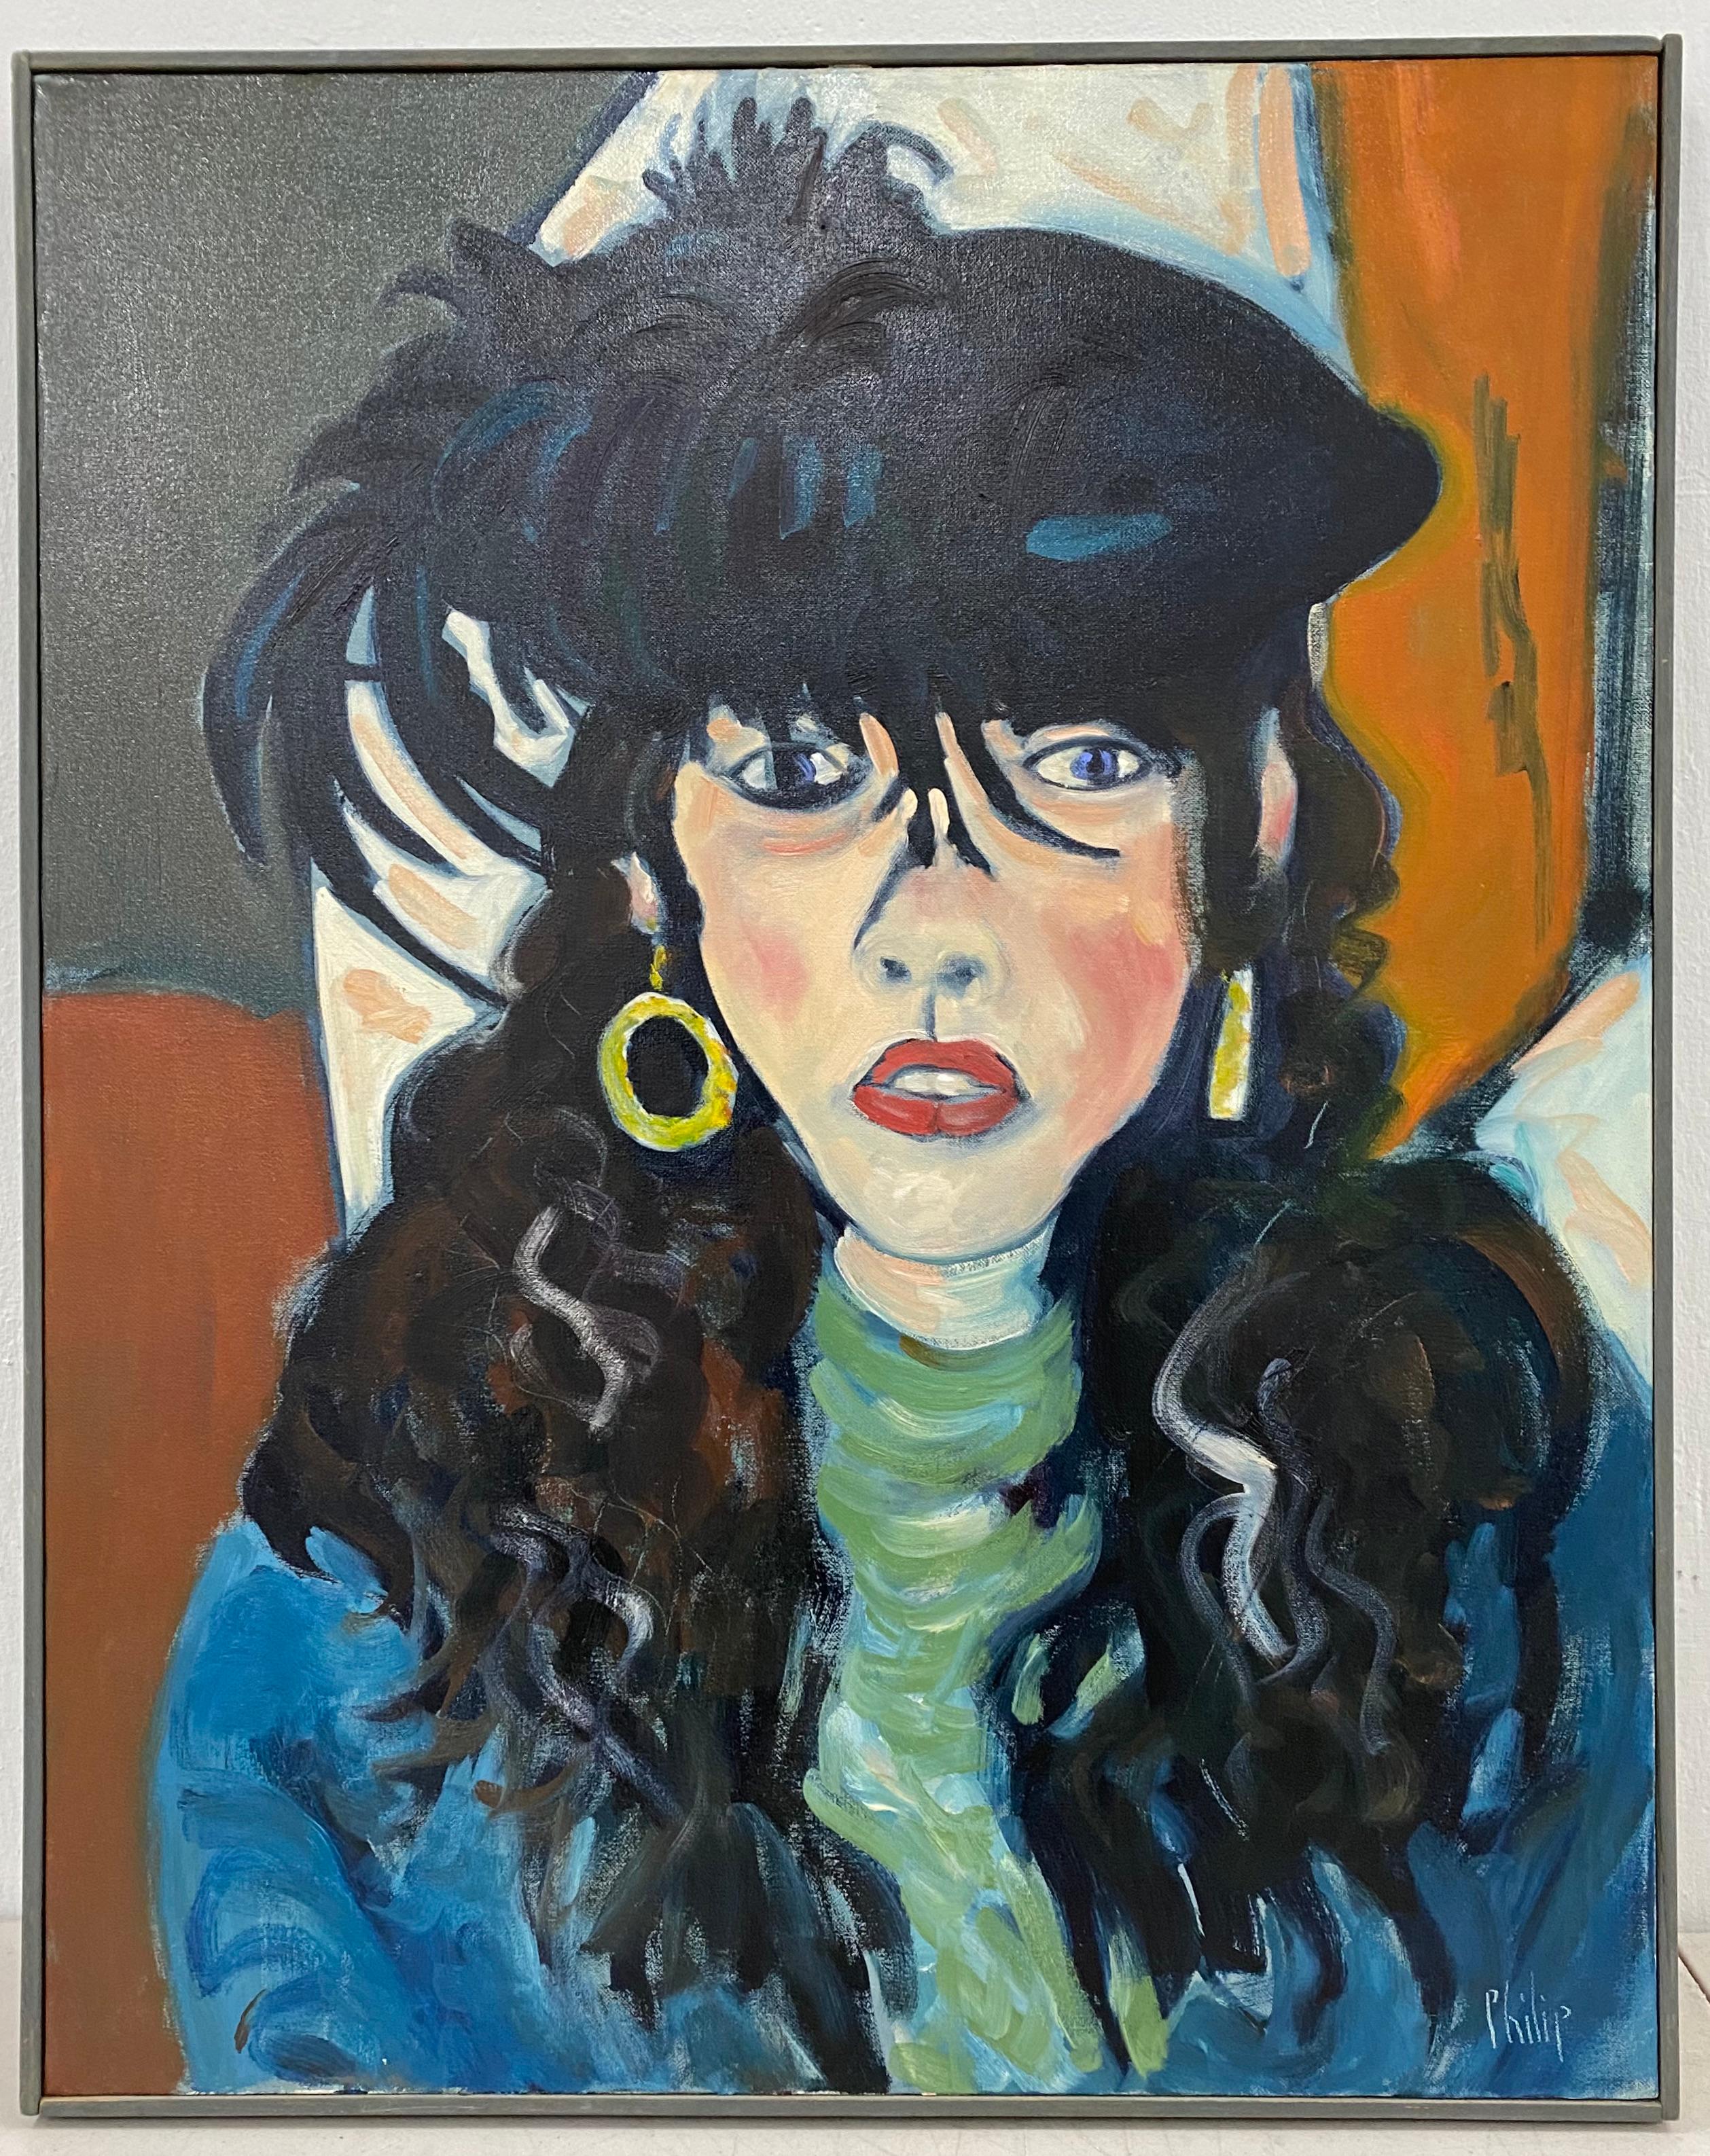 Unknown Portrait Painting - Vintage Oil Portrait "Girl W/ Feathered Hat" by Maine Artist Philip 20th C.